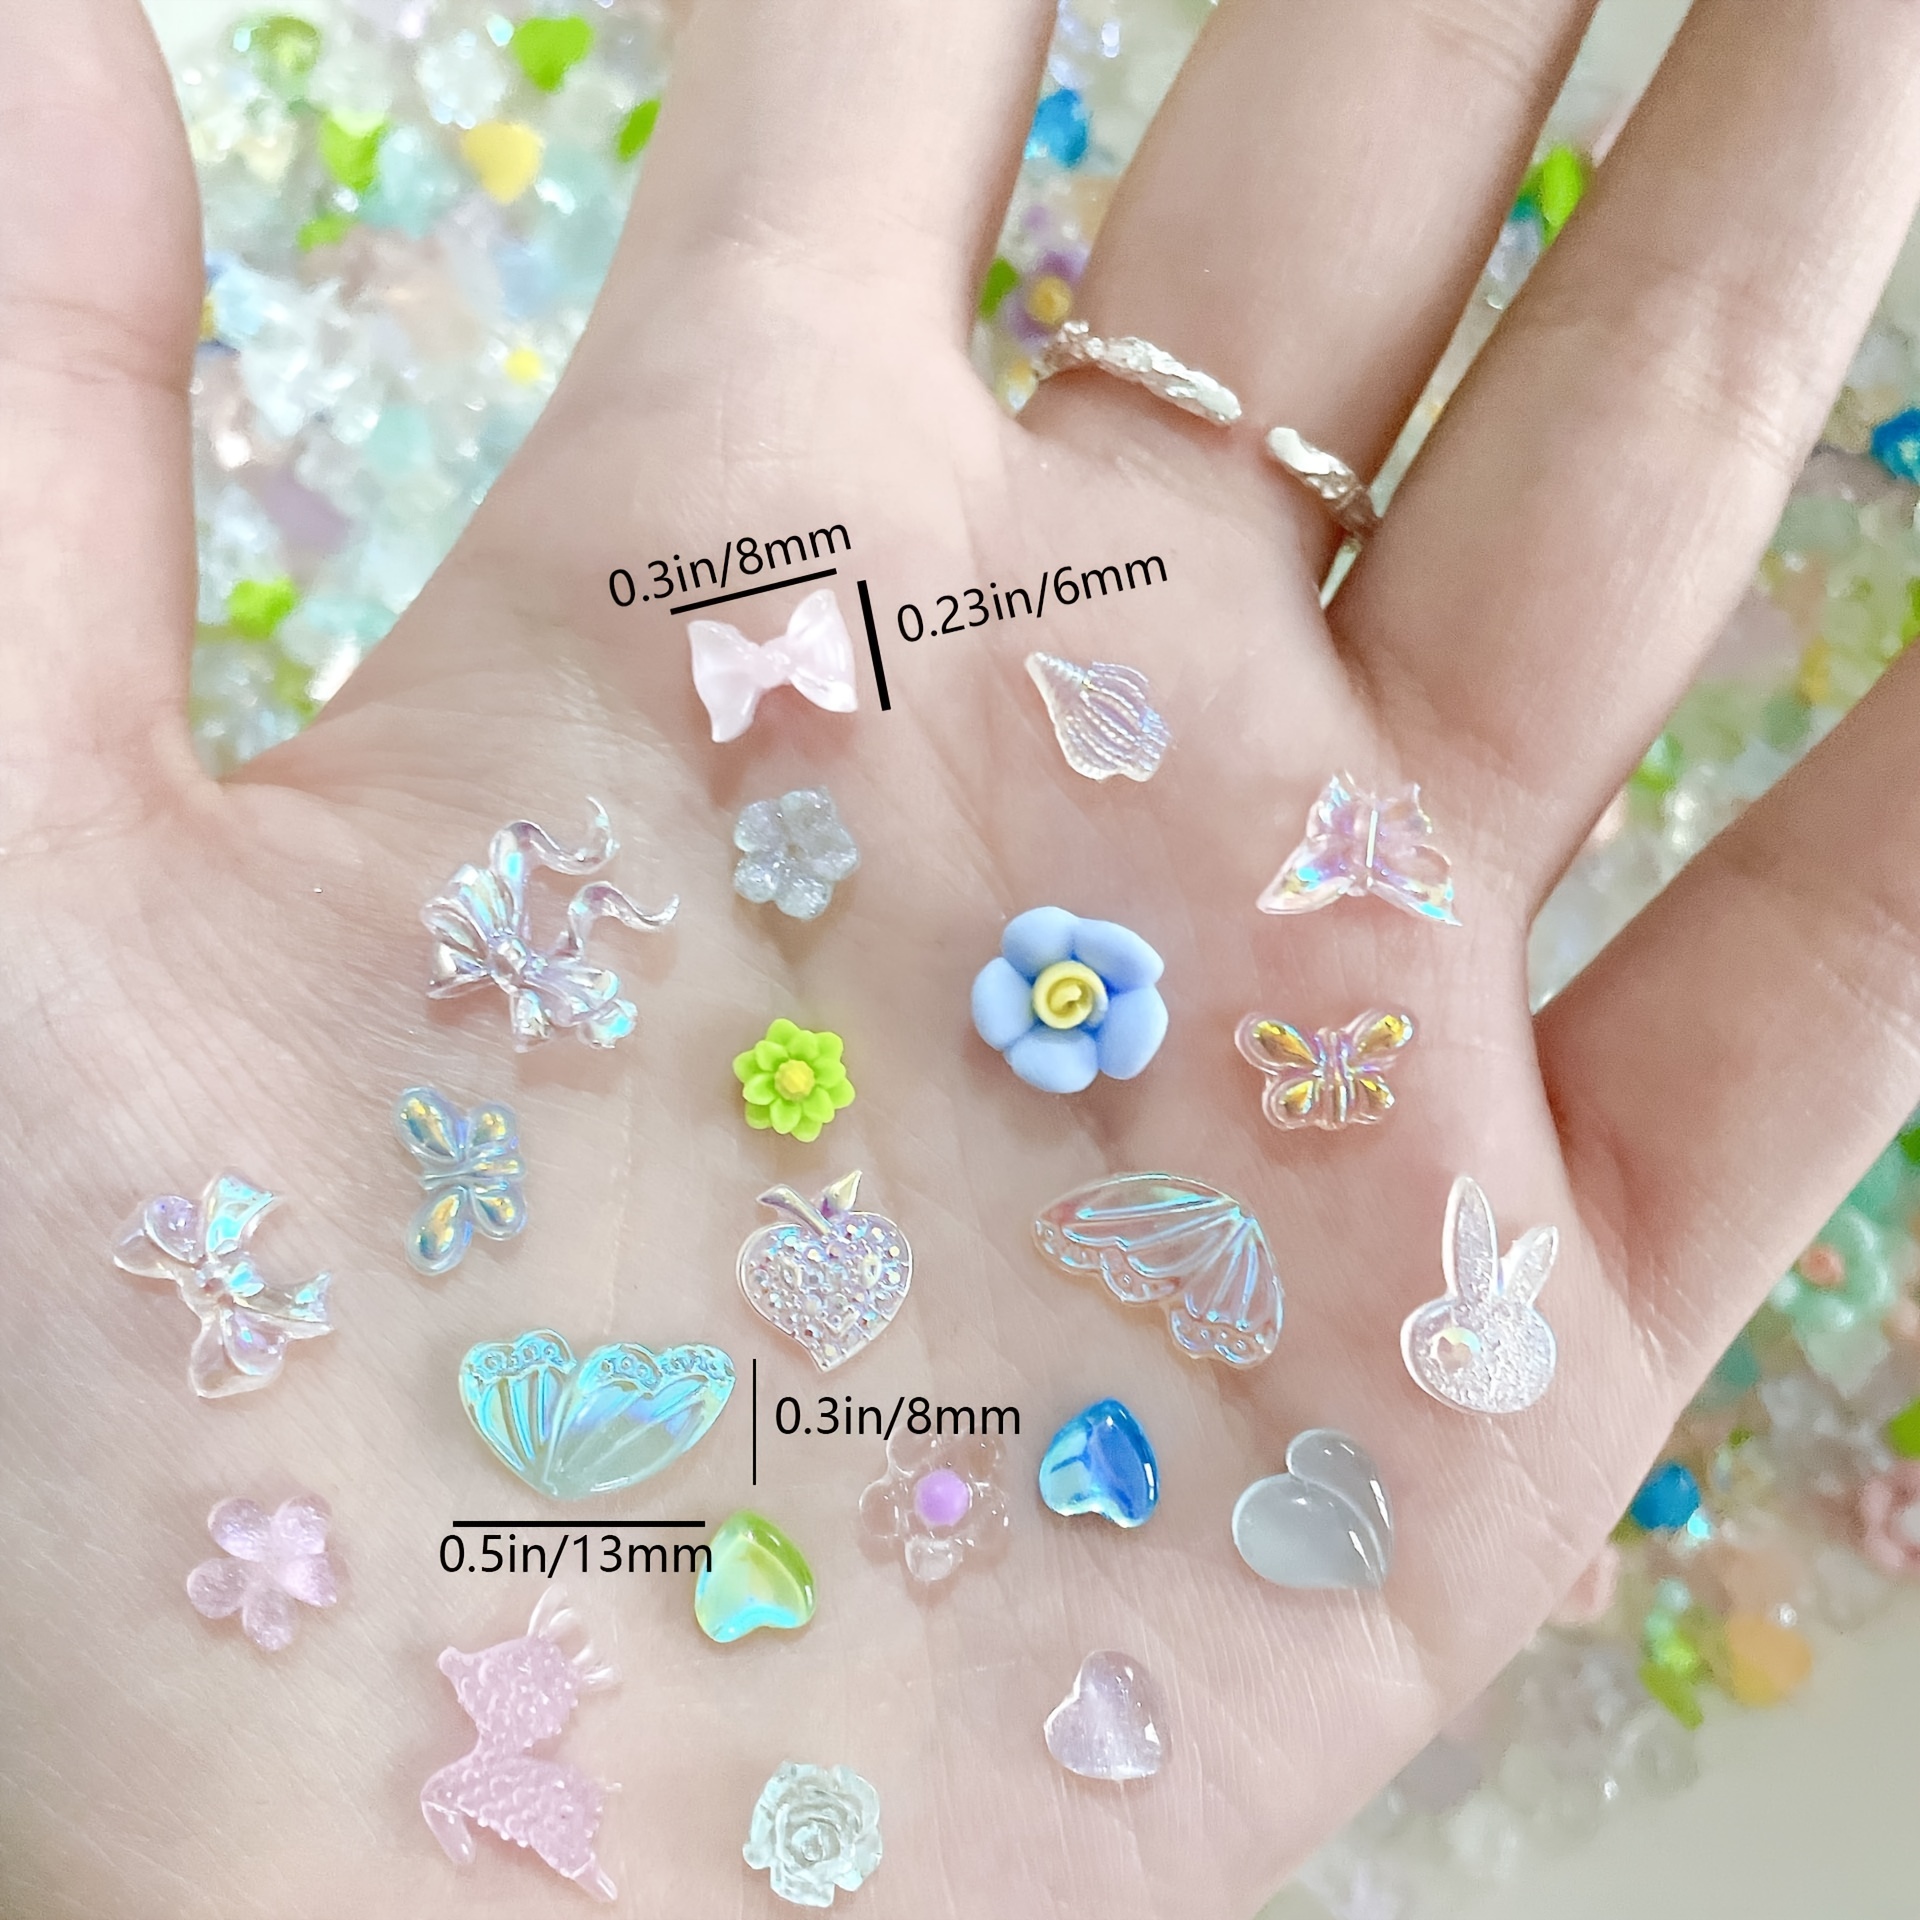 50Pcs Nail Art Jewelry Exquisite Bow Charms Accessories Colored Resin Nail  Art Decoration Nail Supplies